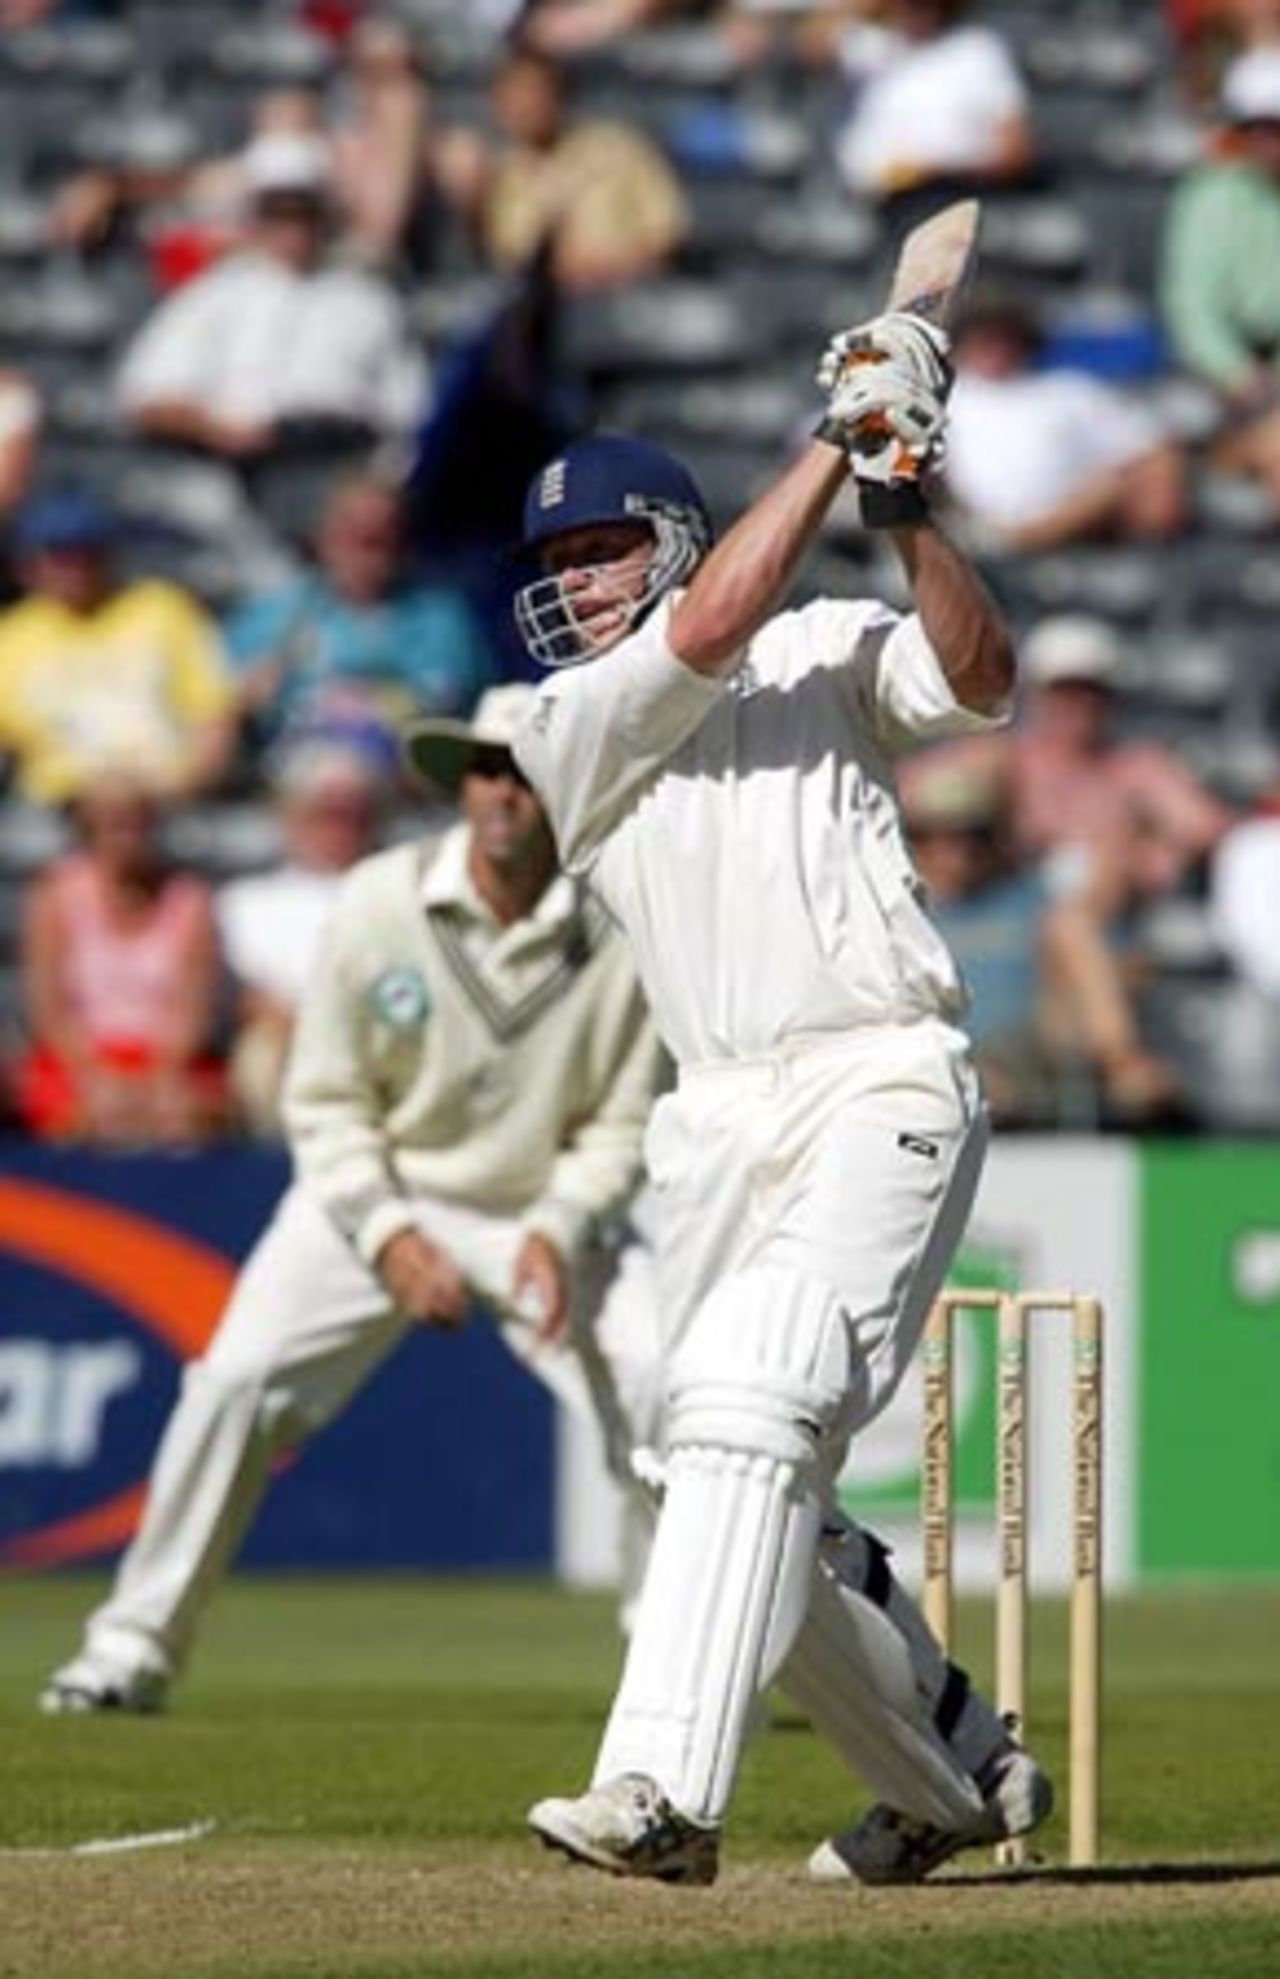 England batsman Andrew Flintoff drives a delivery from New Zealand bowler Craig McMillan down the ground to the boundary during his innings of 137. 1st Test: New Zealand v England at Jade Stadium, Christchurch, 13-17 March 2002 (15 March 2002).